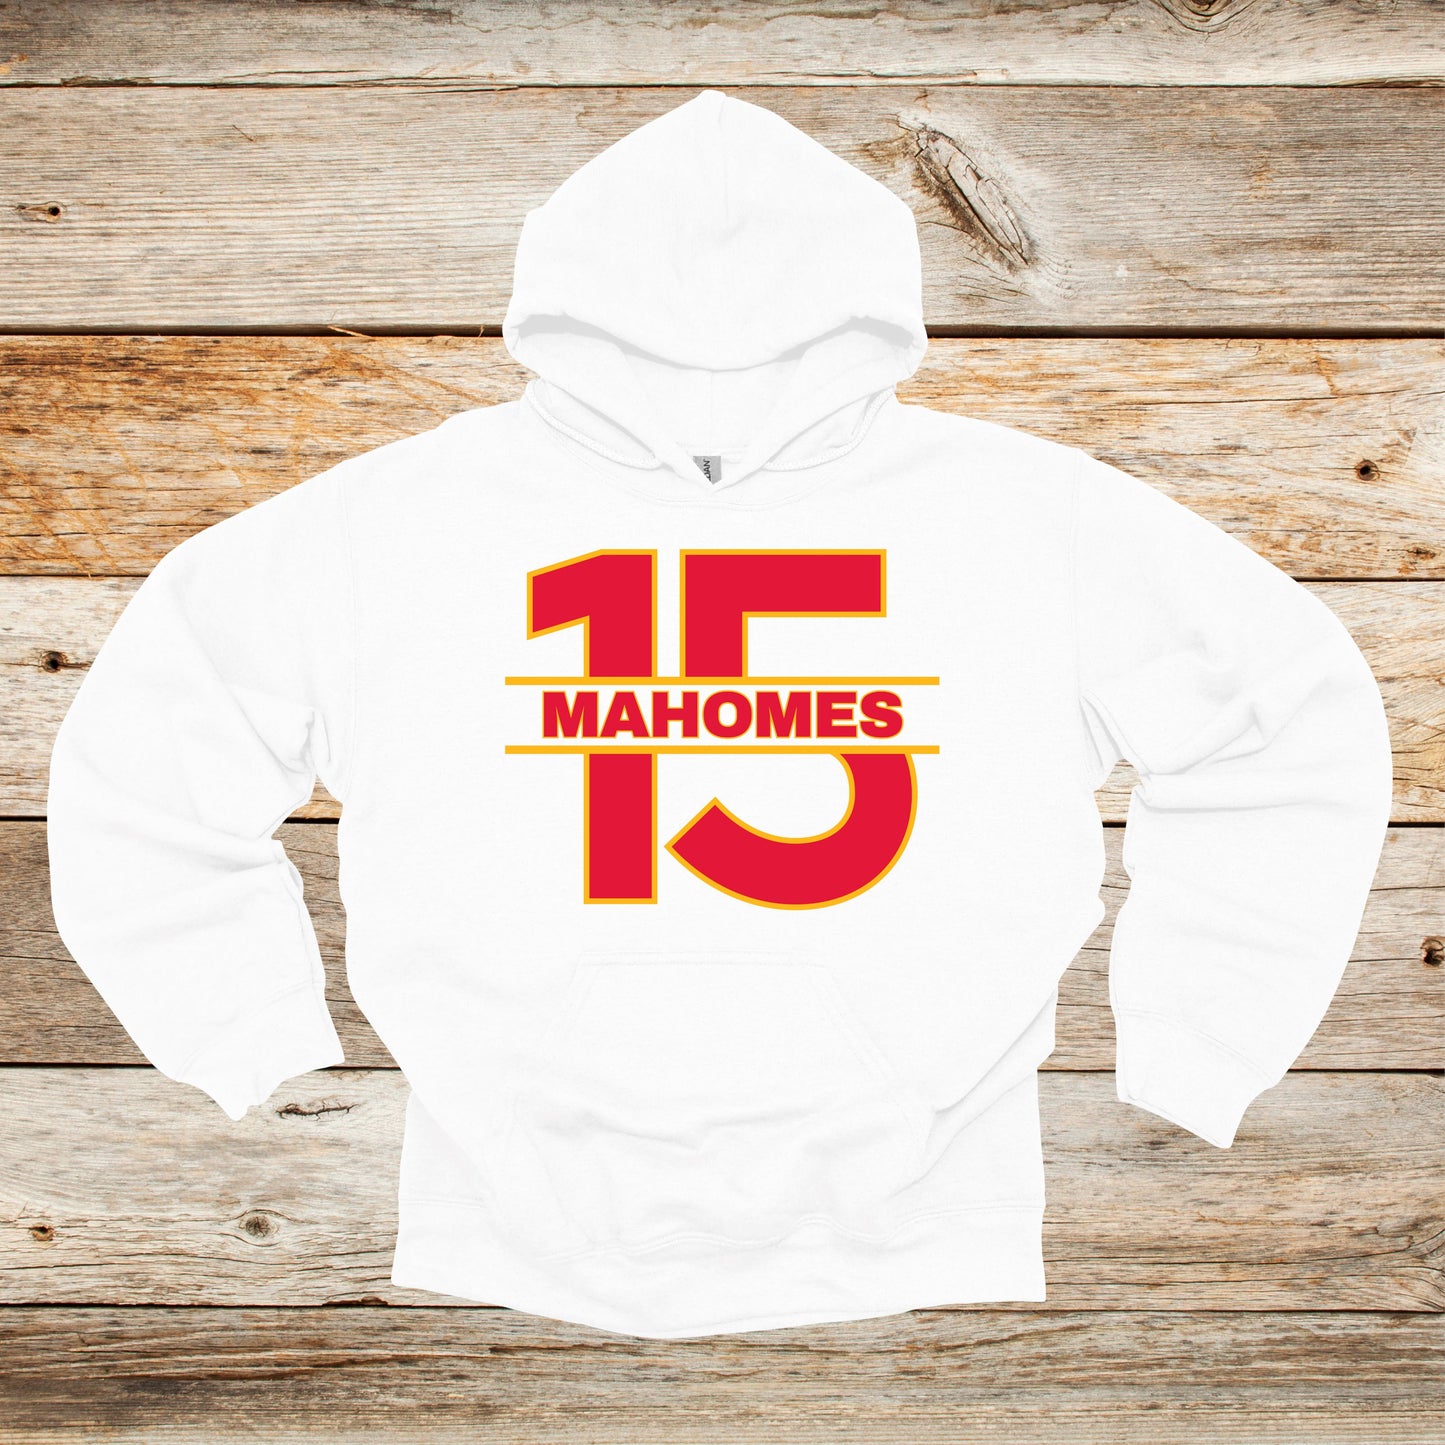 Football Crewneck and Hooded Sweatshirt - Chiefs Football - 15 Mahomes - Adult and Children's Tee Shirts - Sports Hooded Sweatshirt Graphic Avenue Hooded Sweatshirt White Adult Small